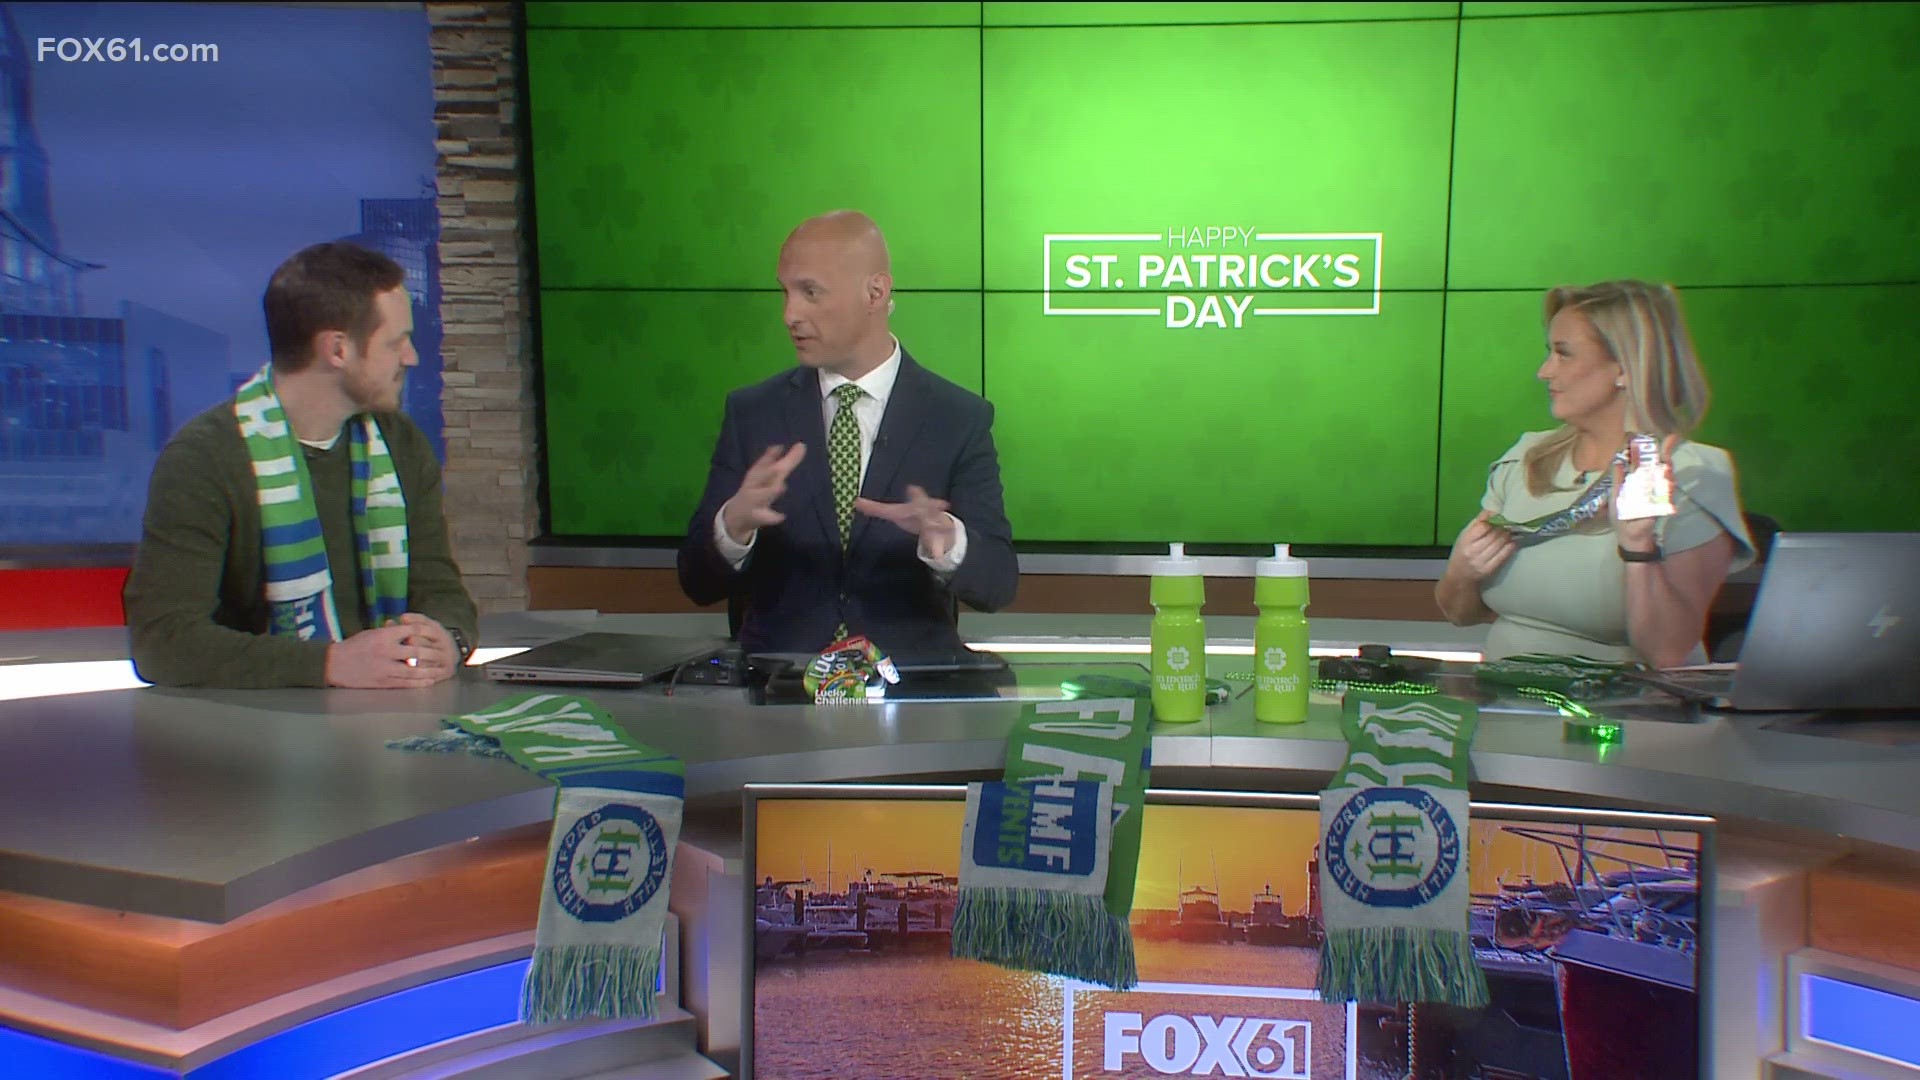 The Hartford Marathon Foundation is celebrating St. Patrick's Day with its Lucky Challenge, continuing in Niantic and Hartford.